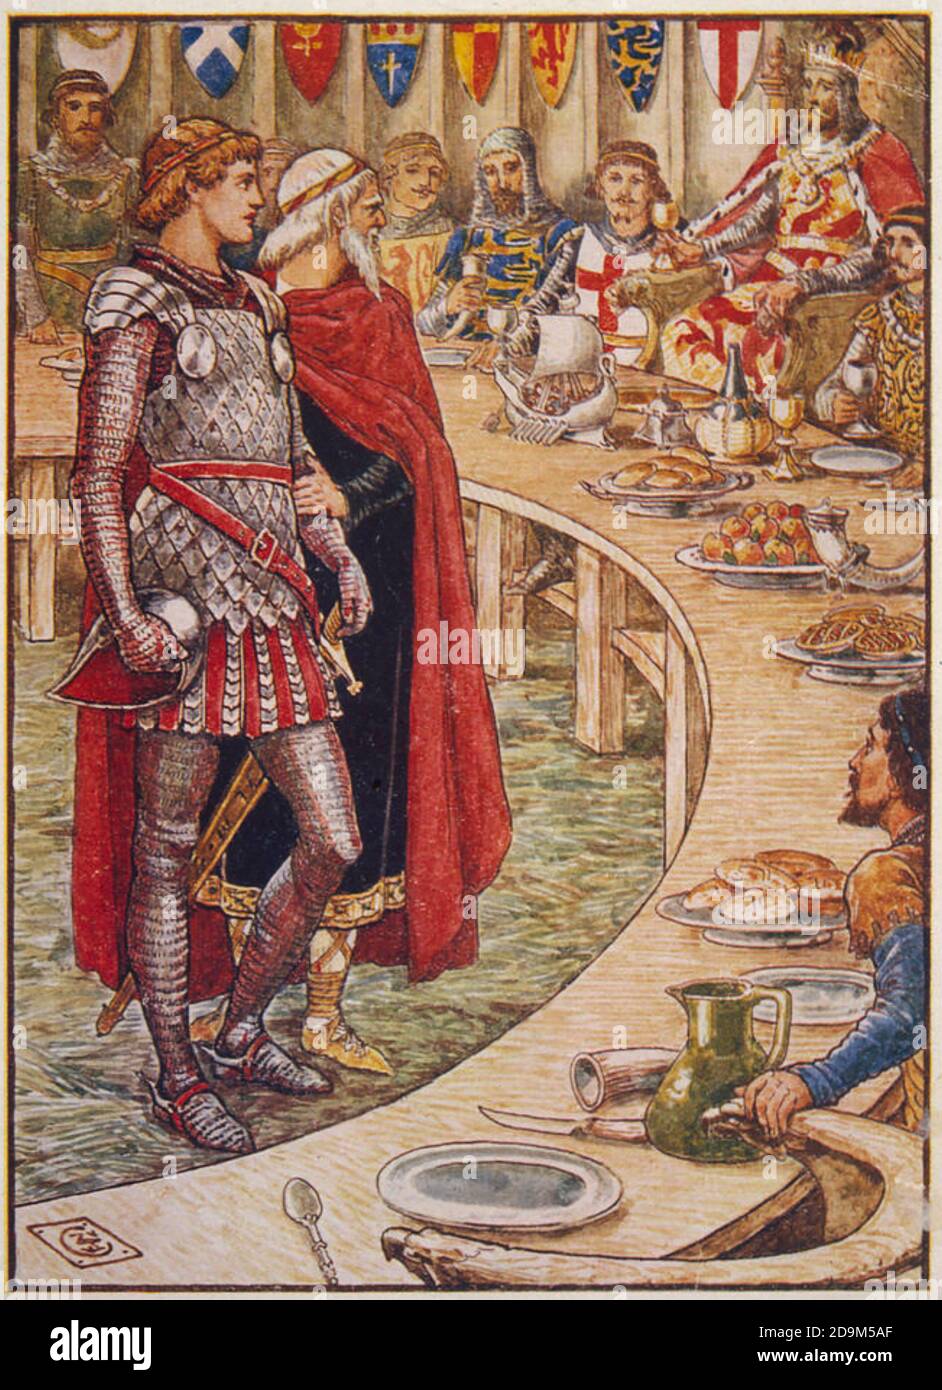 SIR GALAHAD IS PRESENTED TO THE KNIGHT OF THE ROUND TABLE Stock Photo